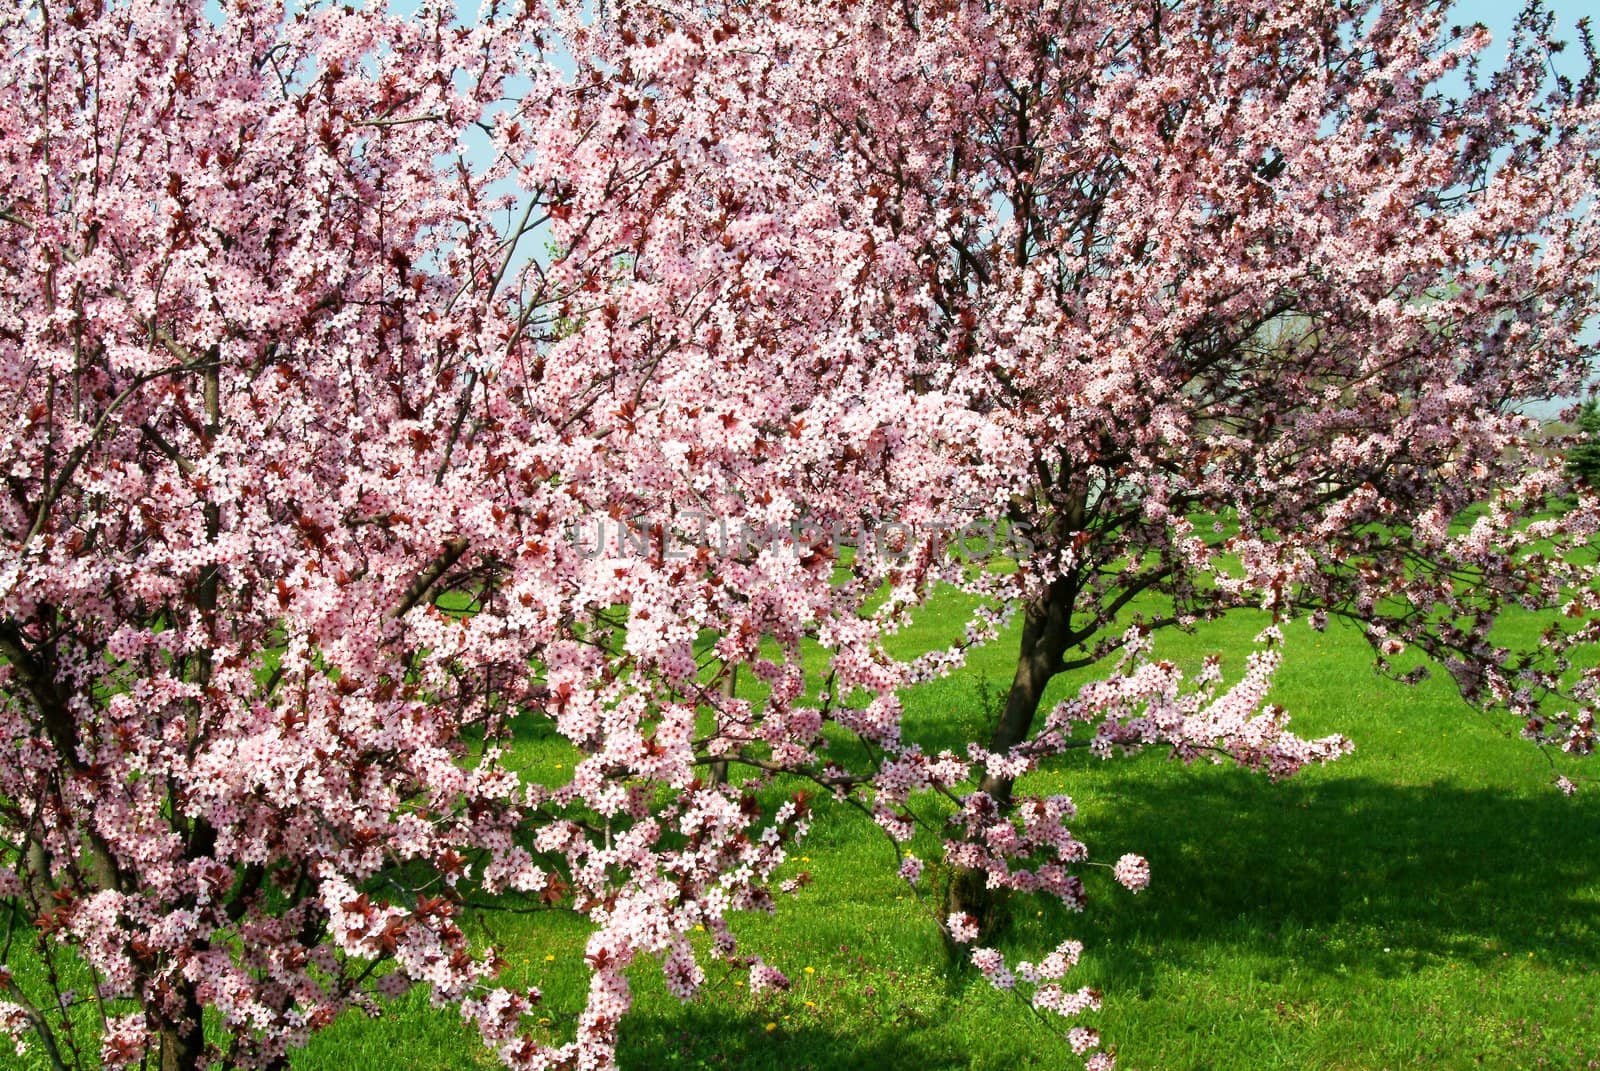 trees with pink blossoms